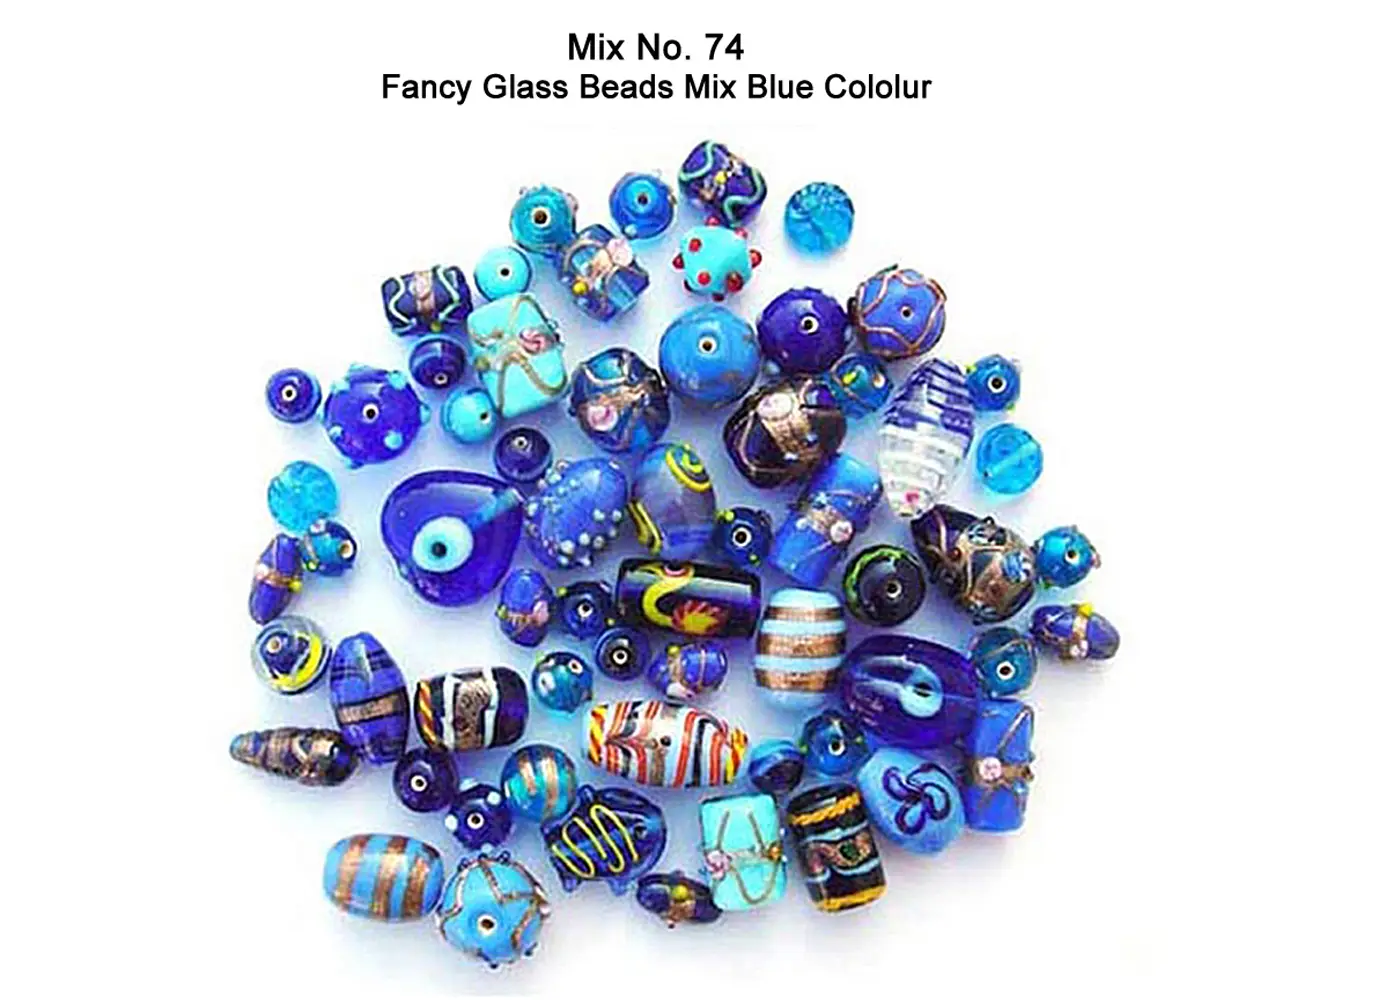 Fancy Glass Beads in Blue color